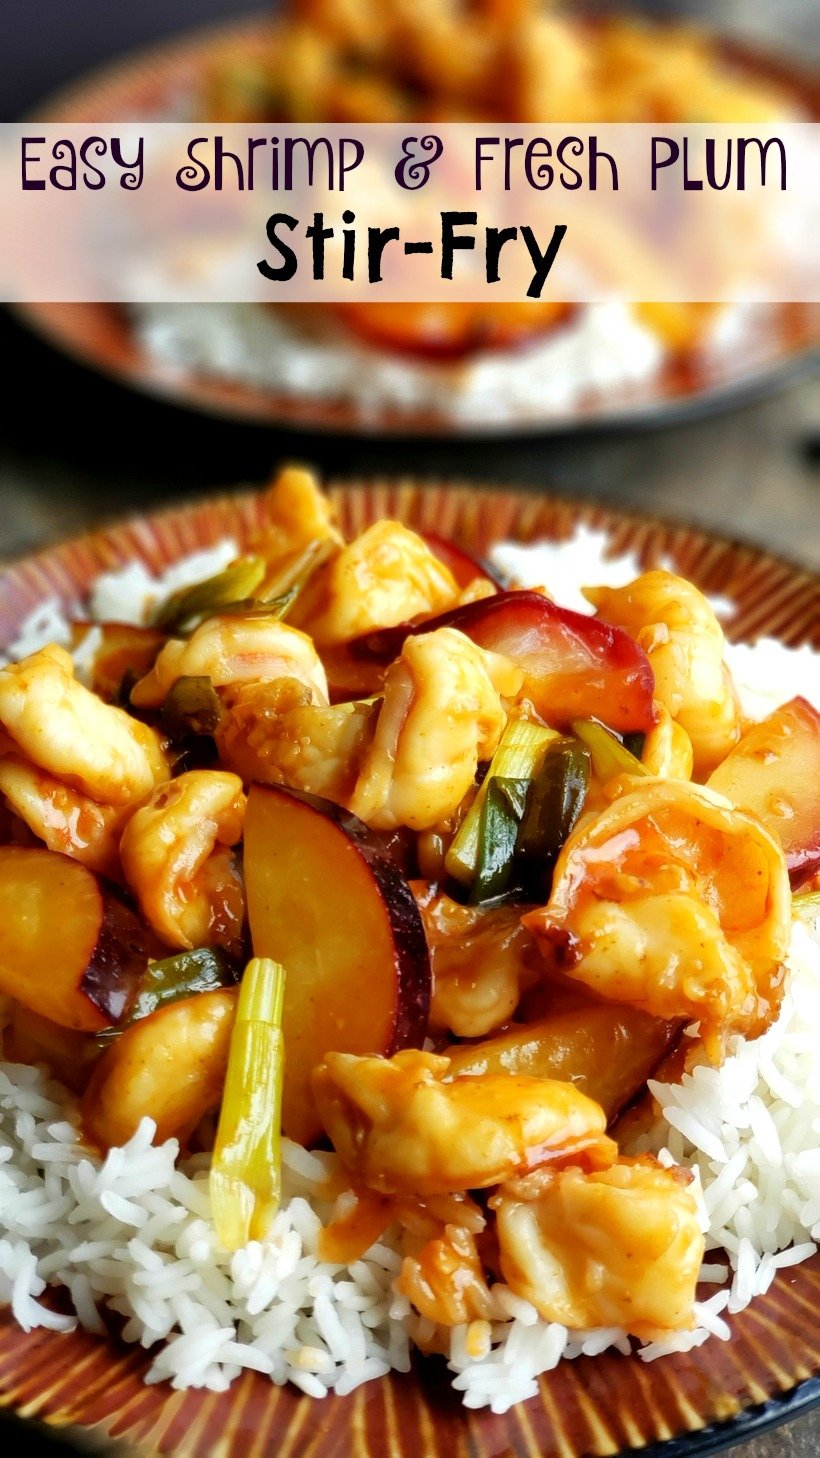 Easy Shrimp and Fresh Plum Stir-Fry in text with two plates of shrimp stir-fry over white rice.